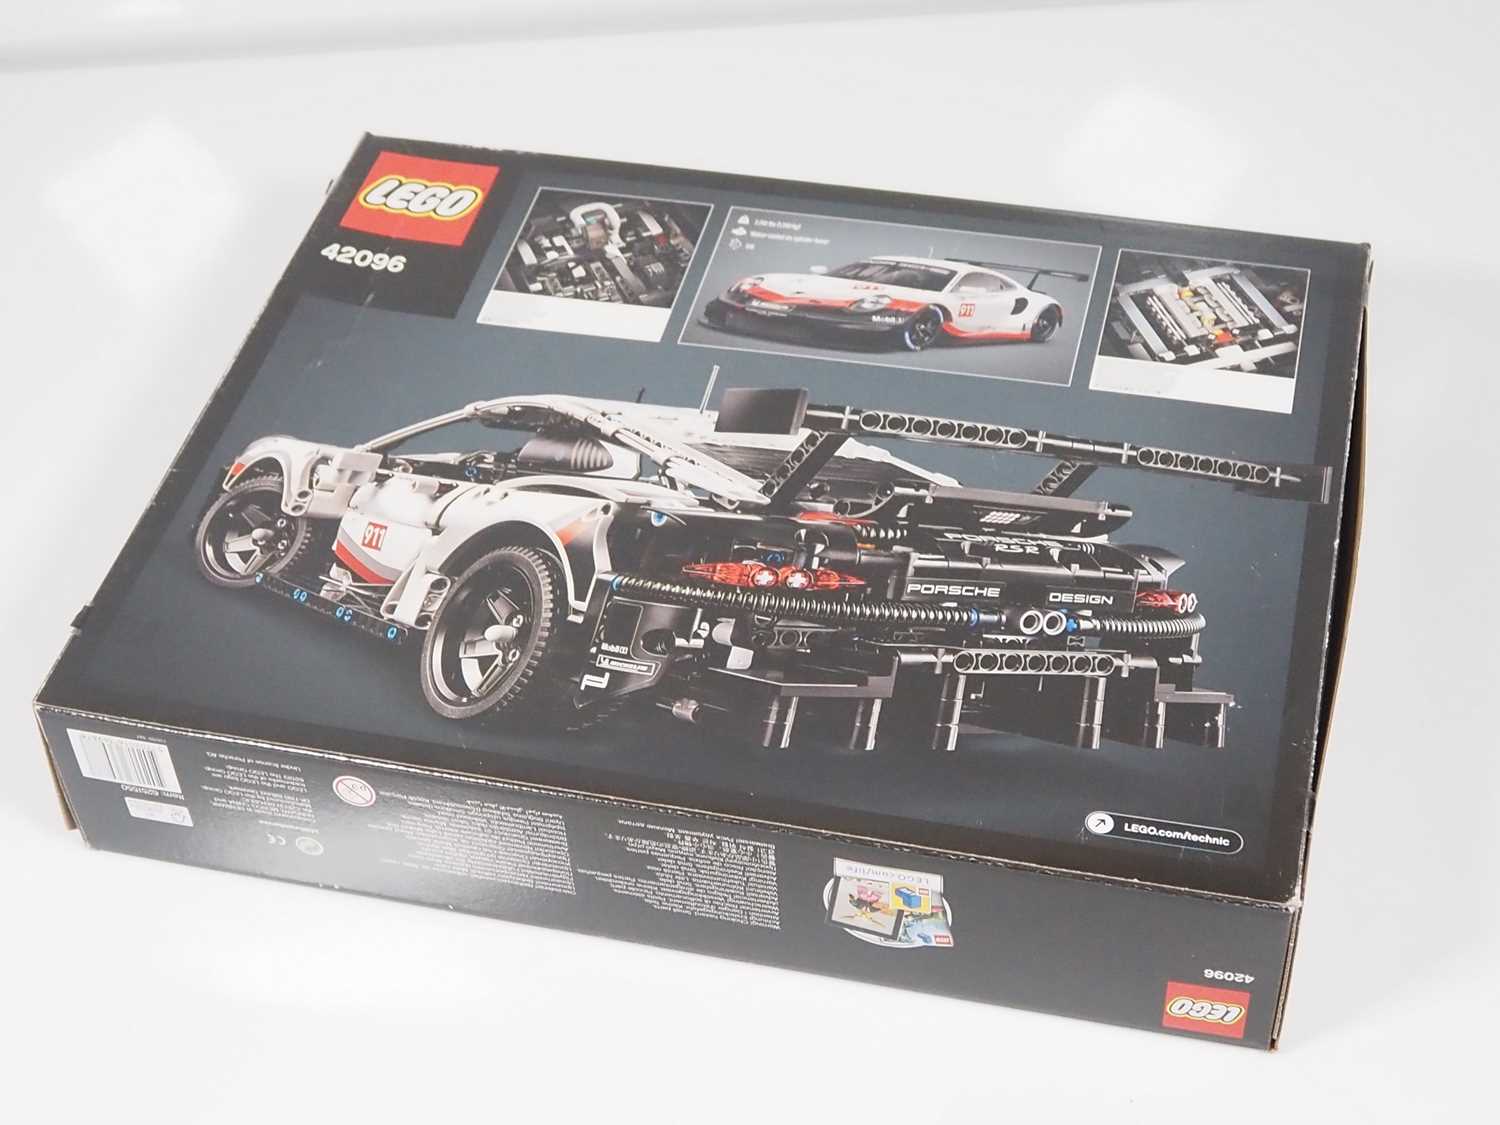 LEGO - TECHNIC #42096 Porsche 911 RSR - Appears complete, with instructions and small container of - Bild 7 aus 8